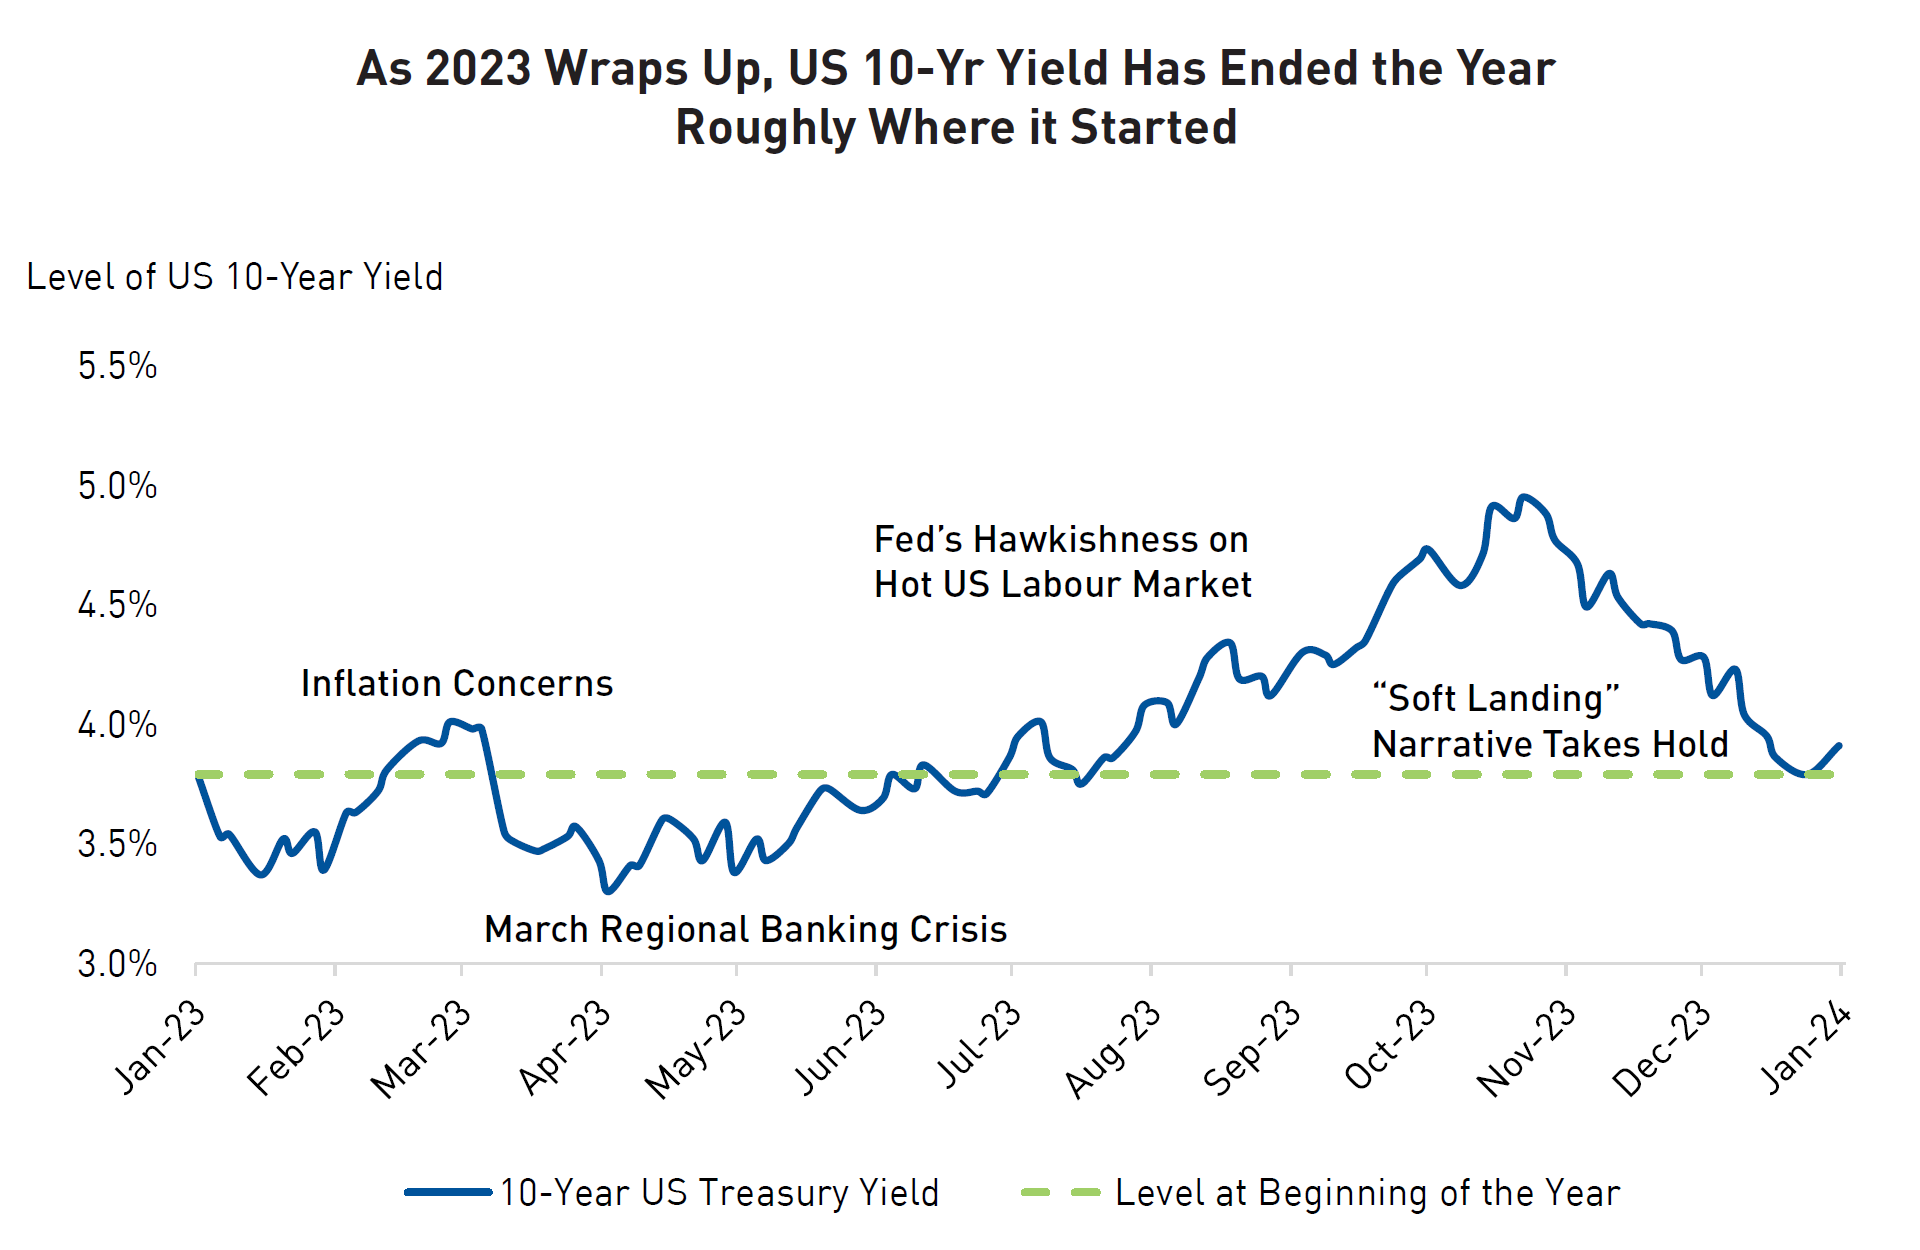 Chart showing as 2023 wraps up, us 10-yr yield has ended the year roughly where it started